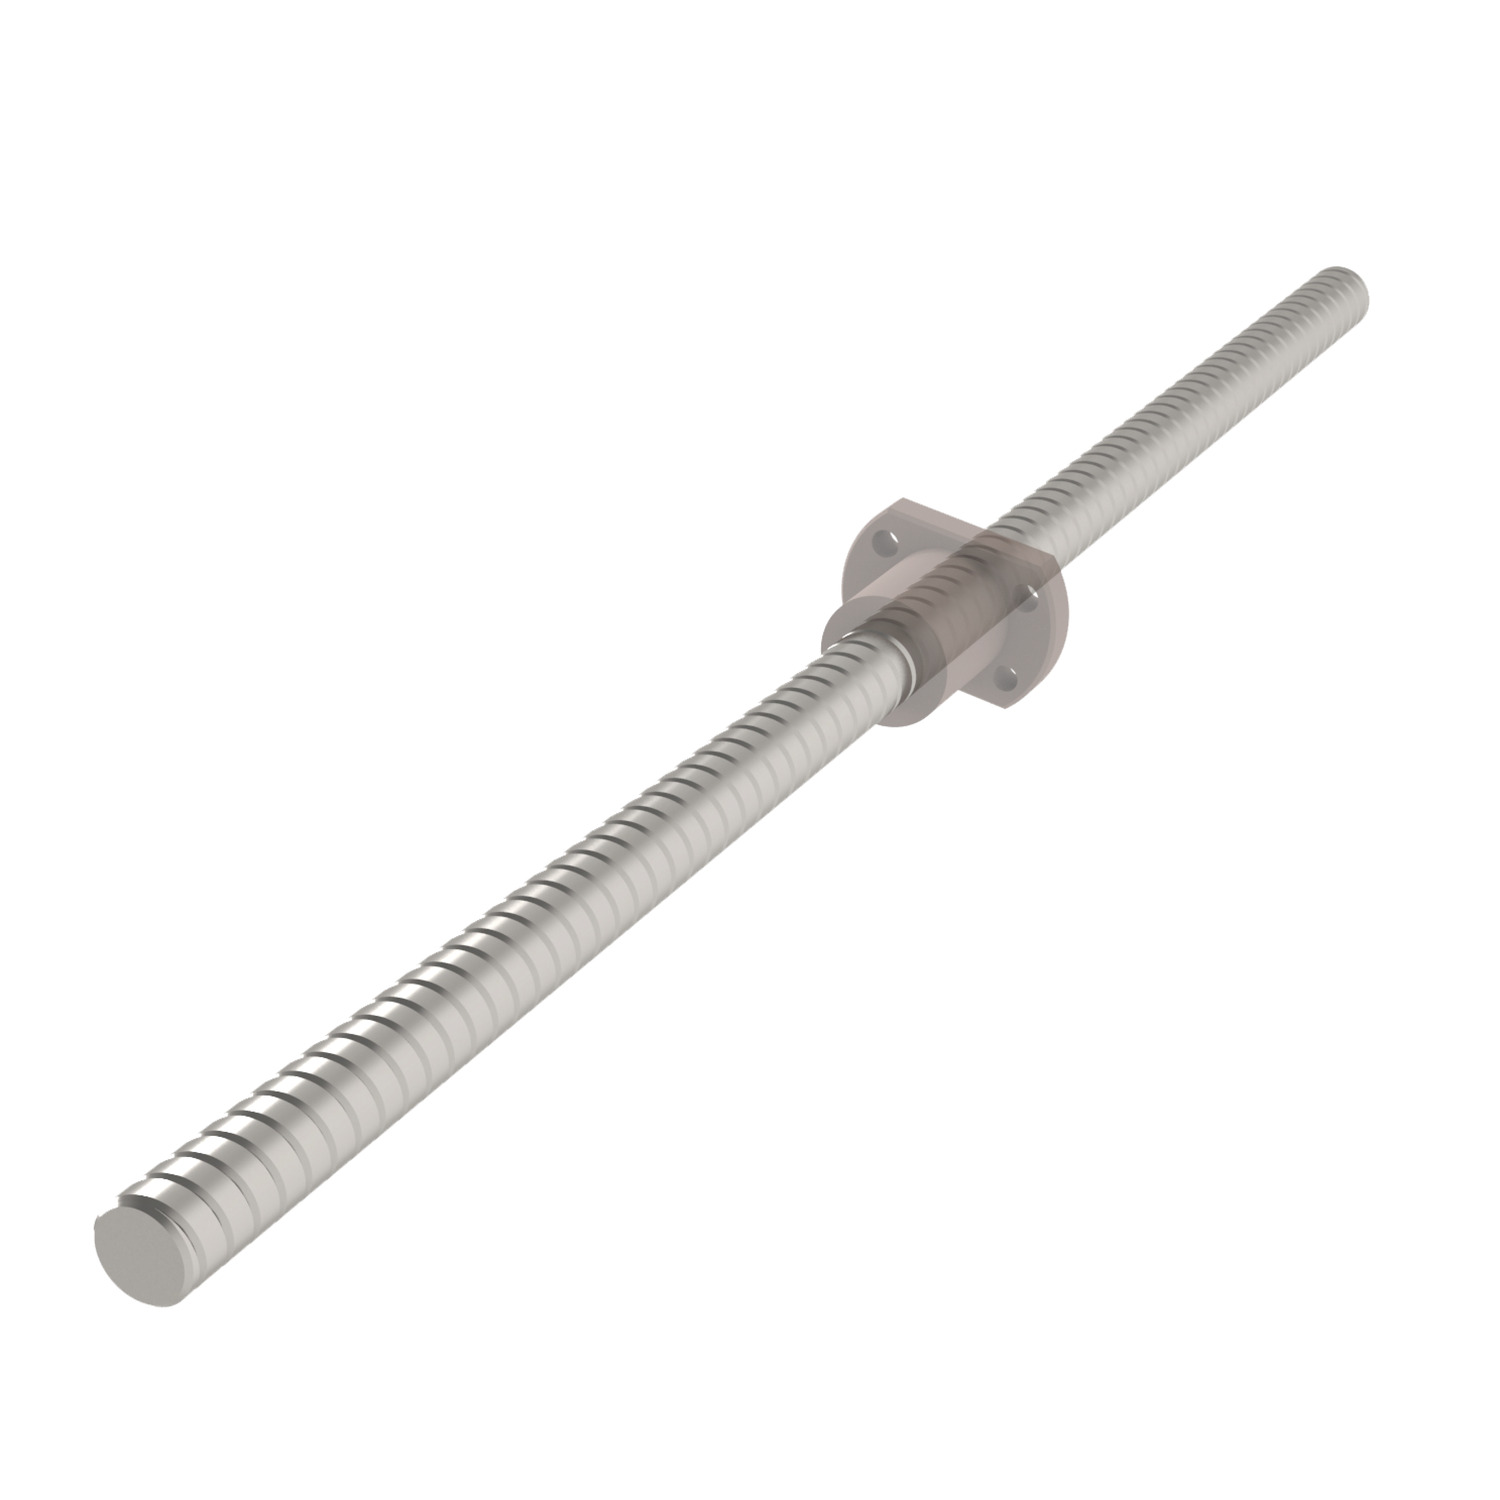 Product L1349, High Helix Lead Screws - Stainless lead screw only (to suit L1350 nuts) / 